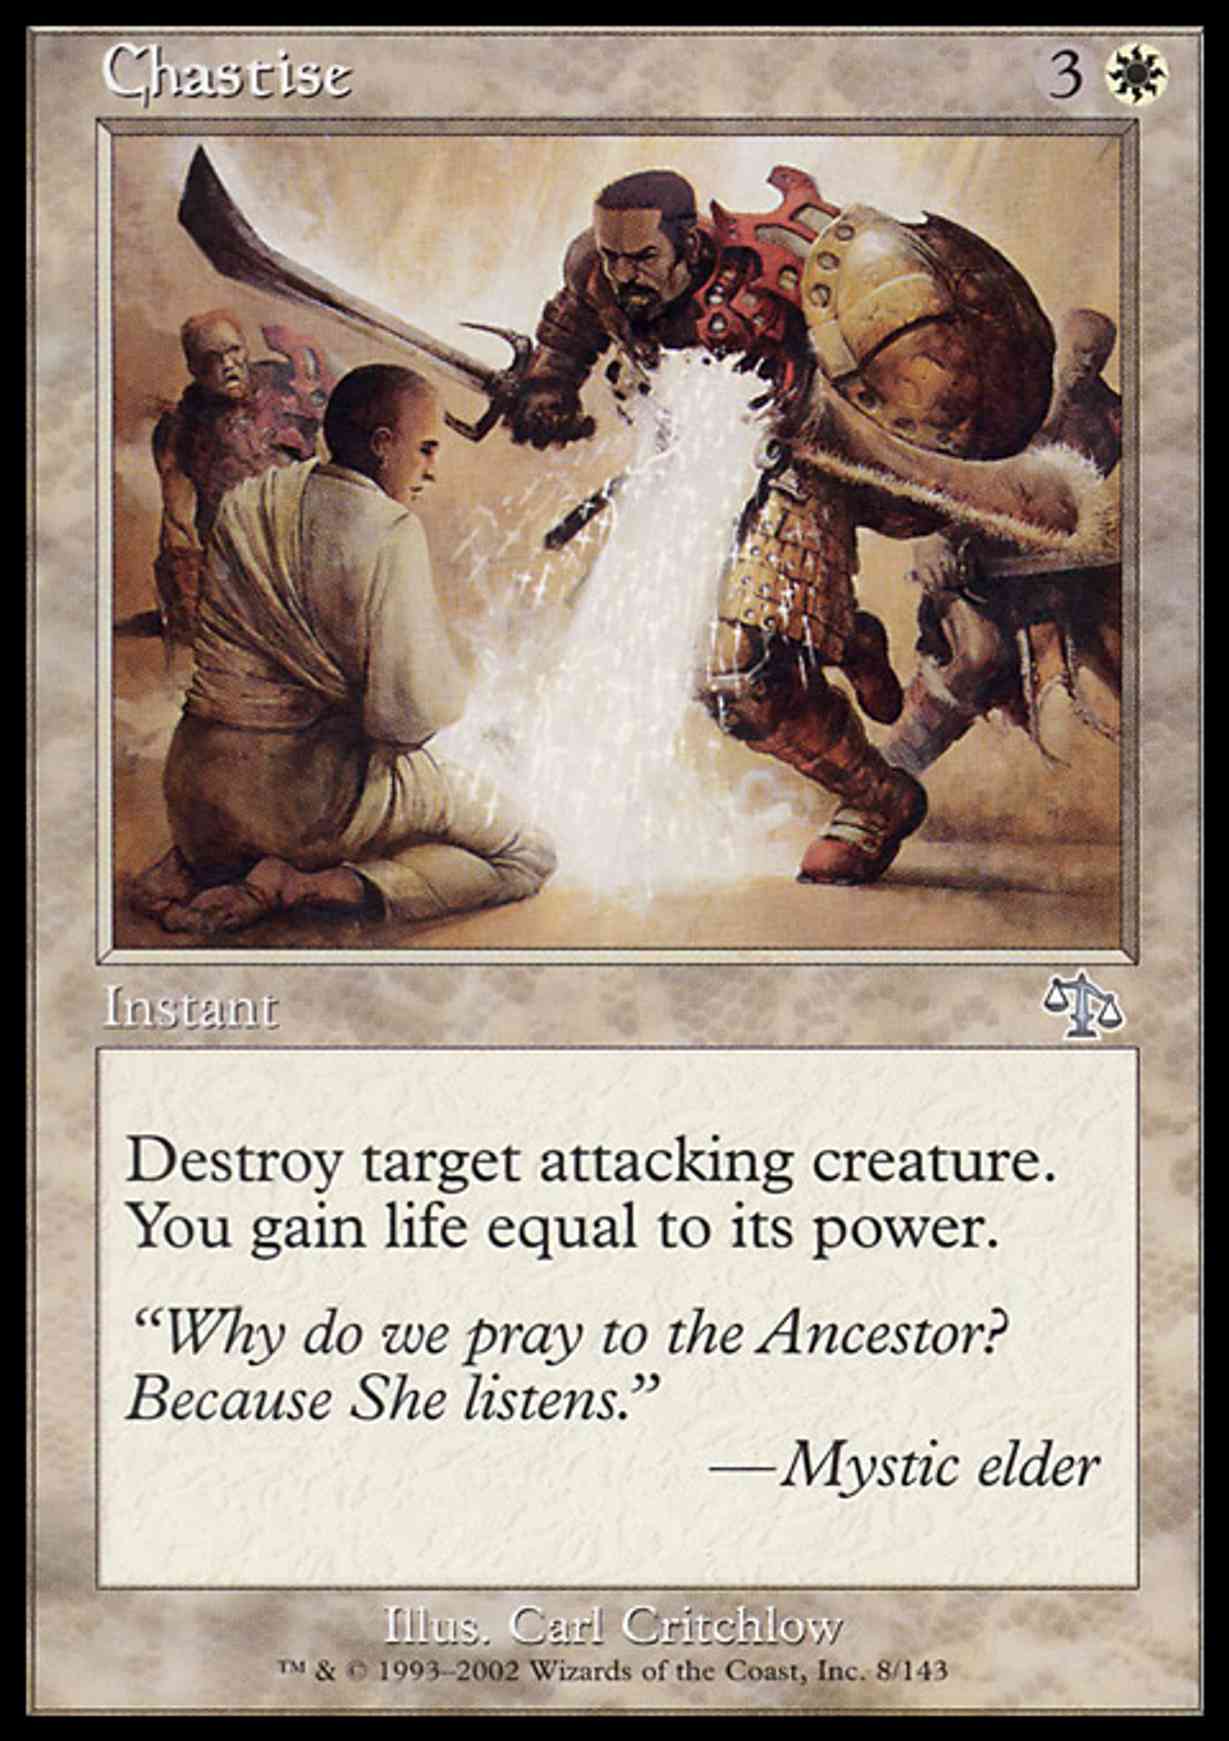 Chastise magic card front